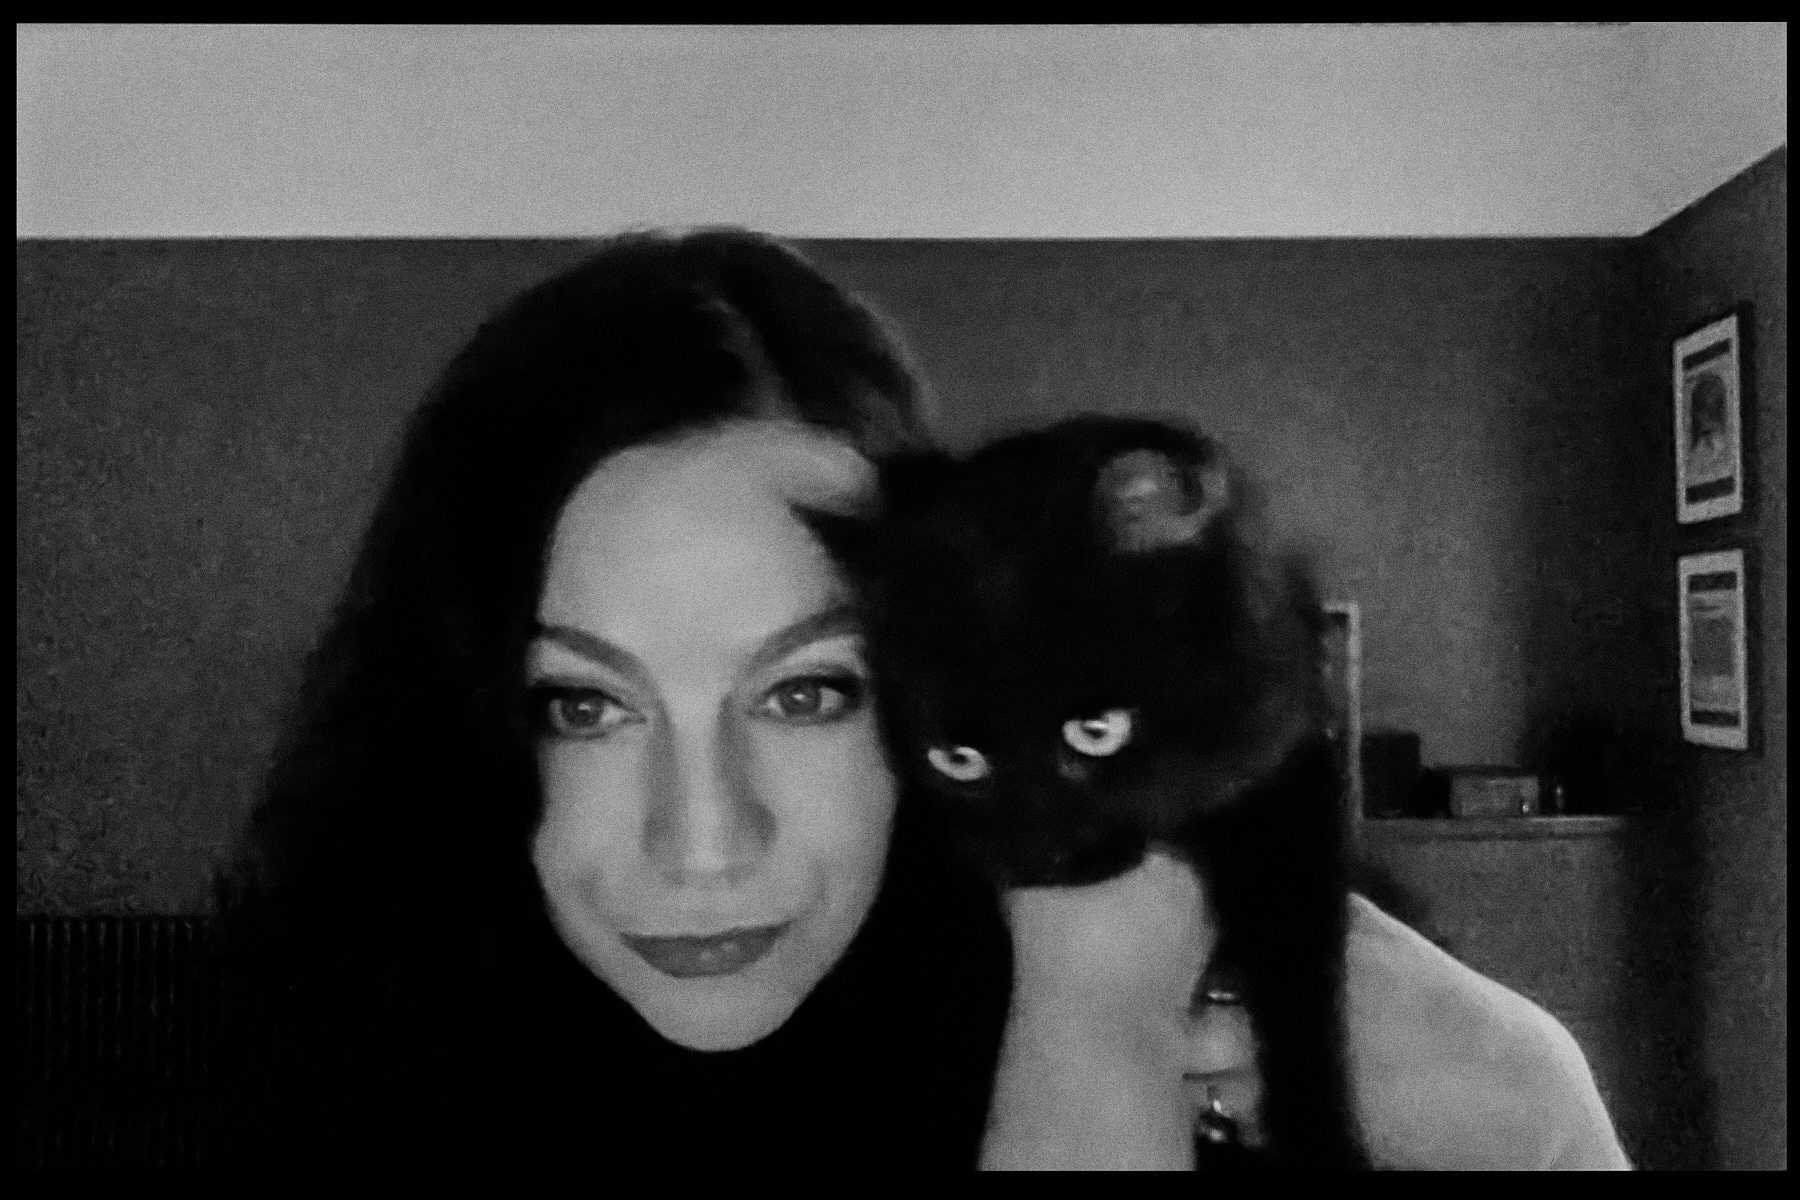 A black-and-white photograph of Jenni Fagan holding a black cat